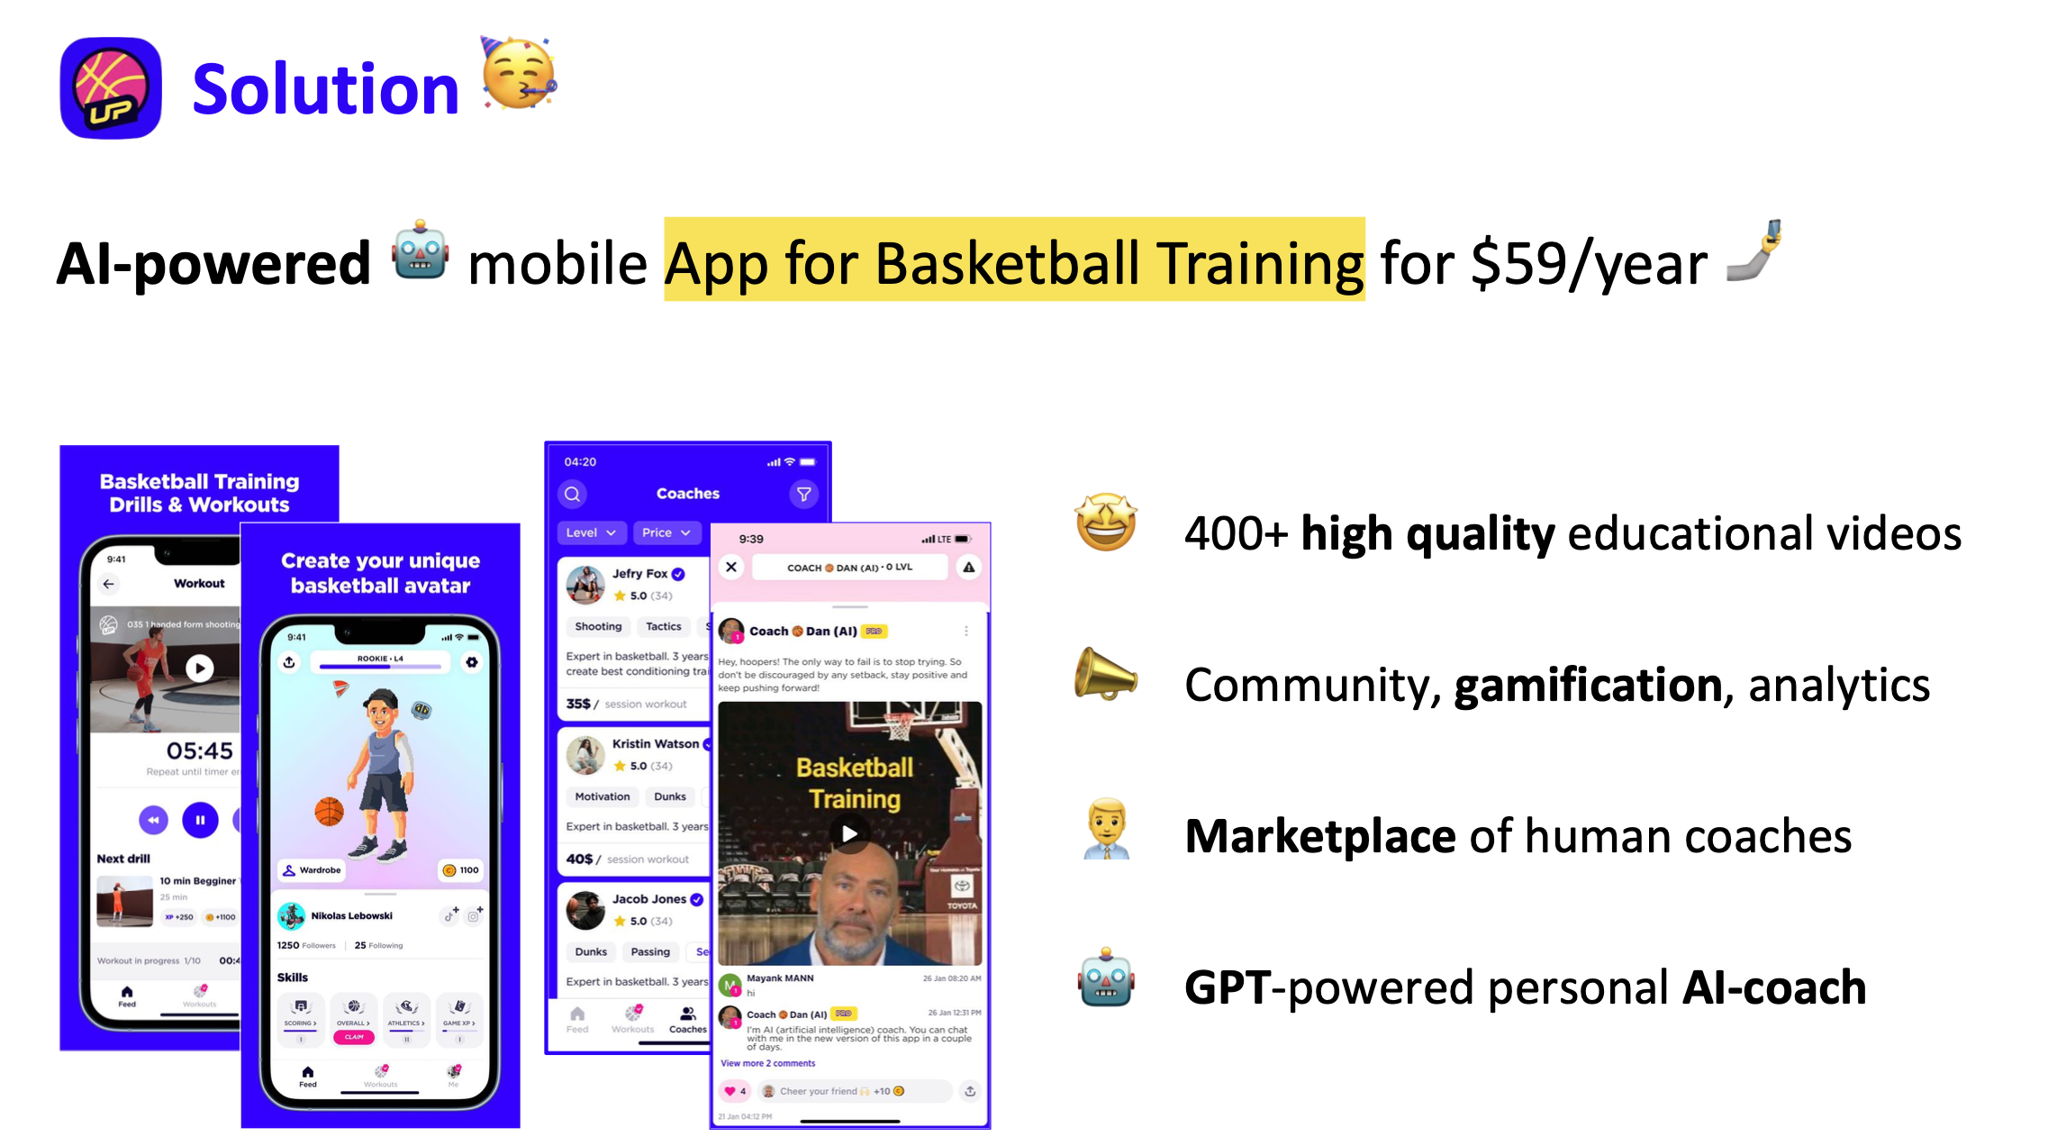 AI-powered 🤖 mobile App for Basketball Training for $59/year 🤳